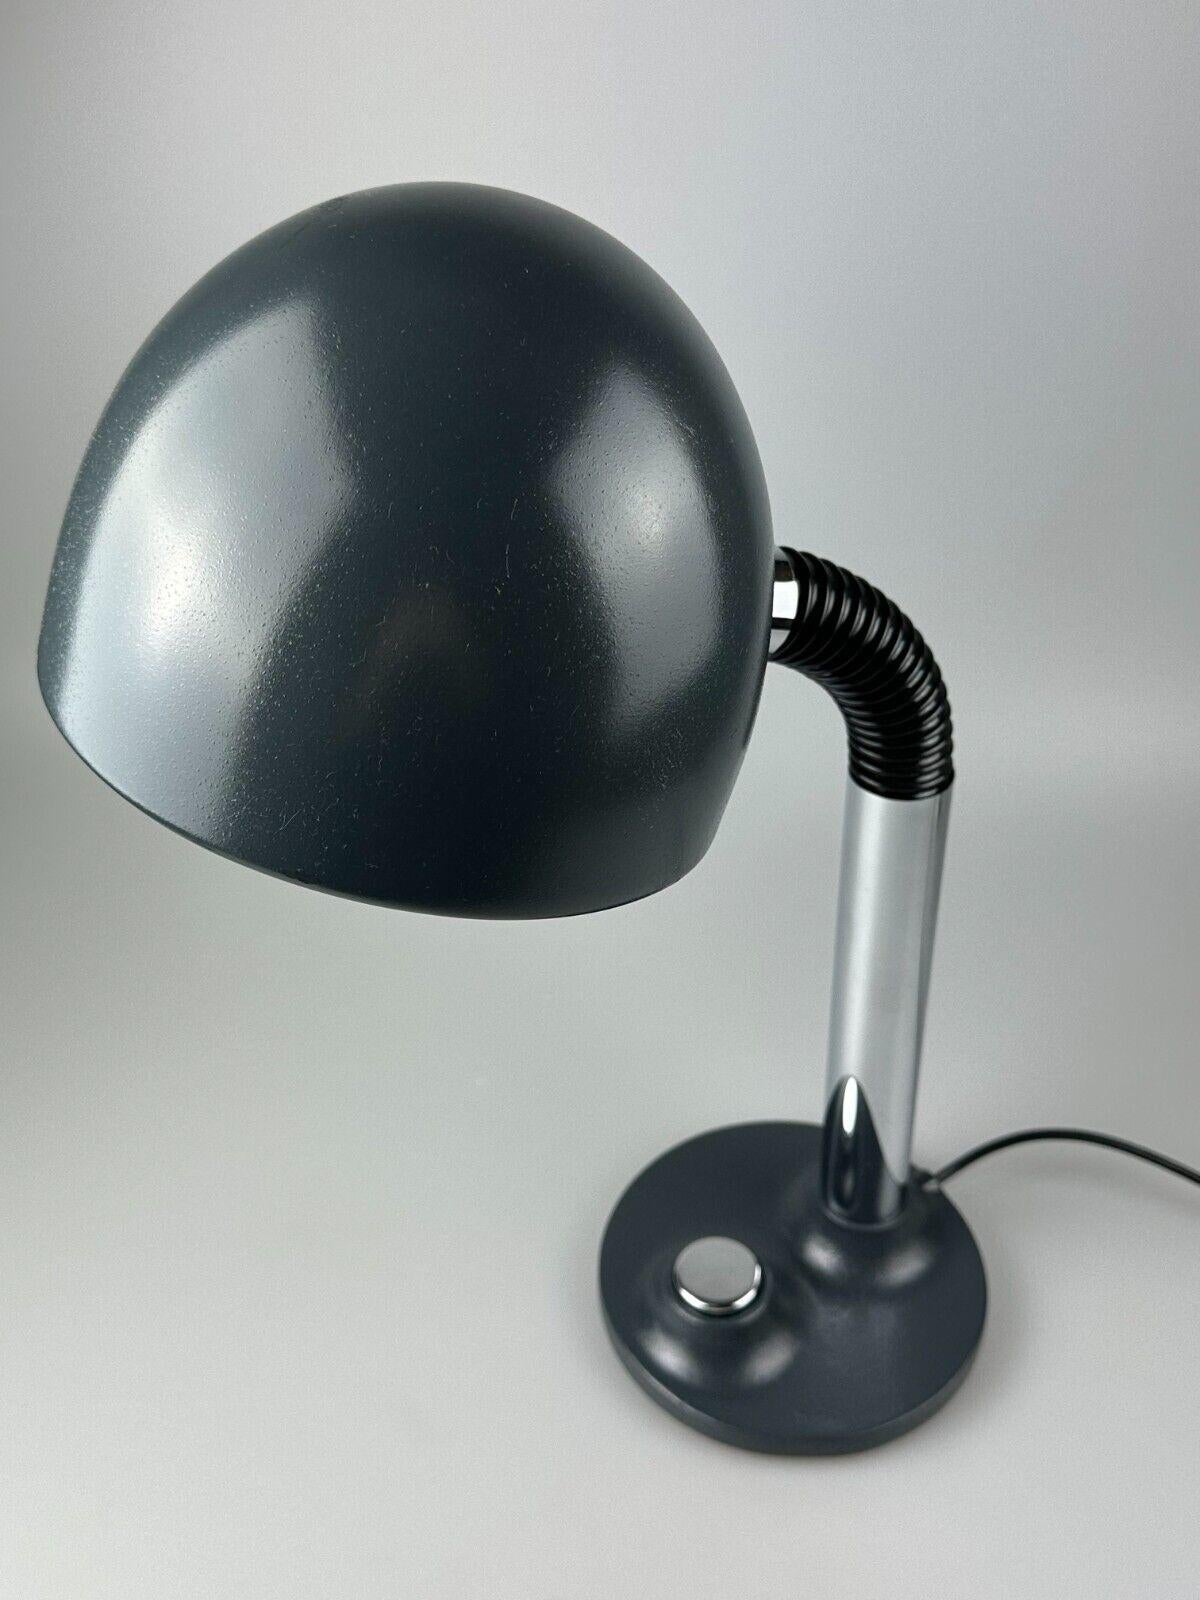 60s 70s table lamp Egon Hillebrand ball lamp space age metal design In Good Condition For Sale In Neuenkirchen, NI